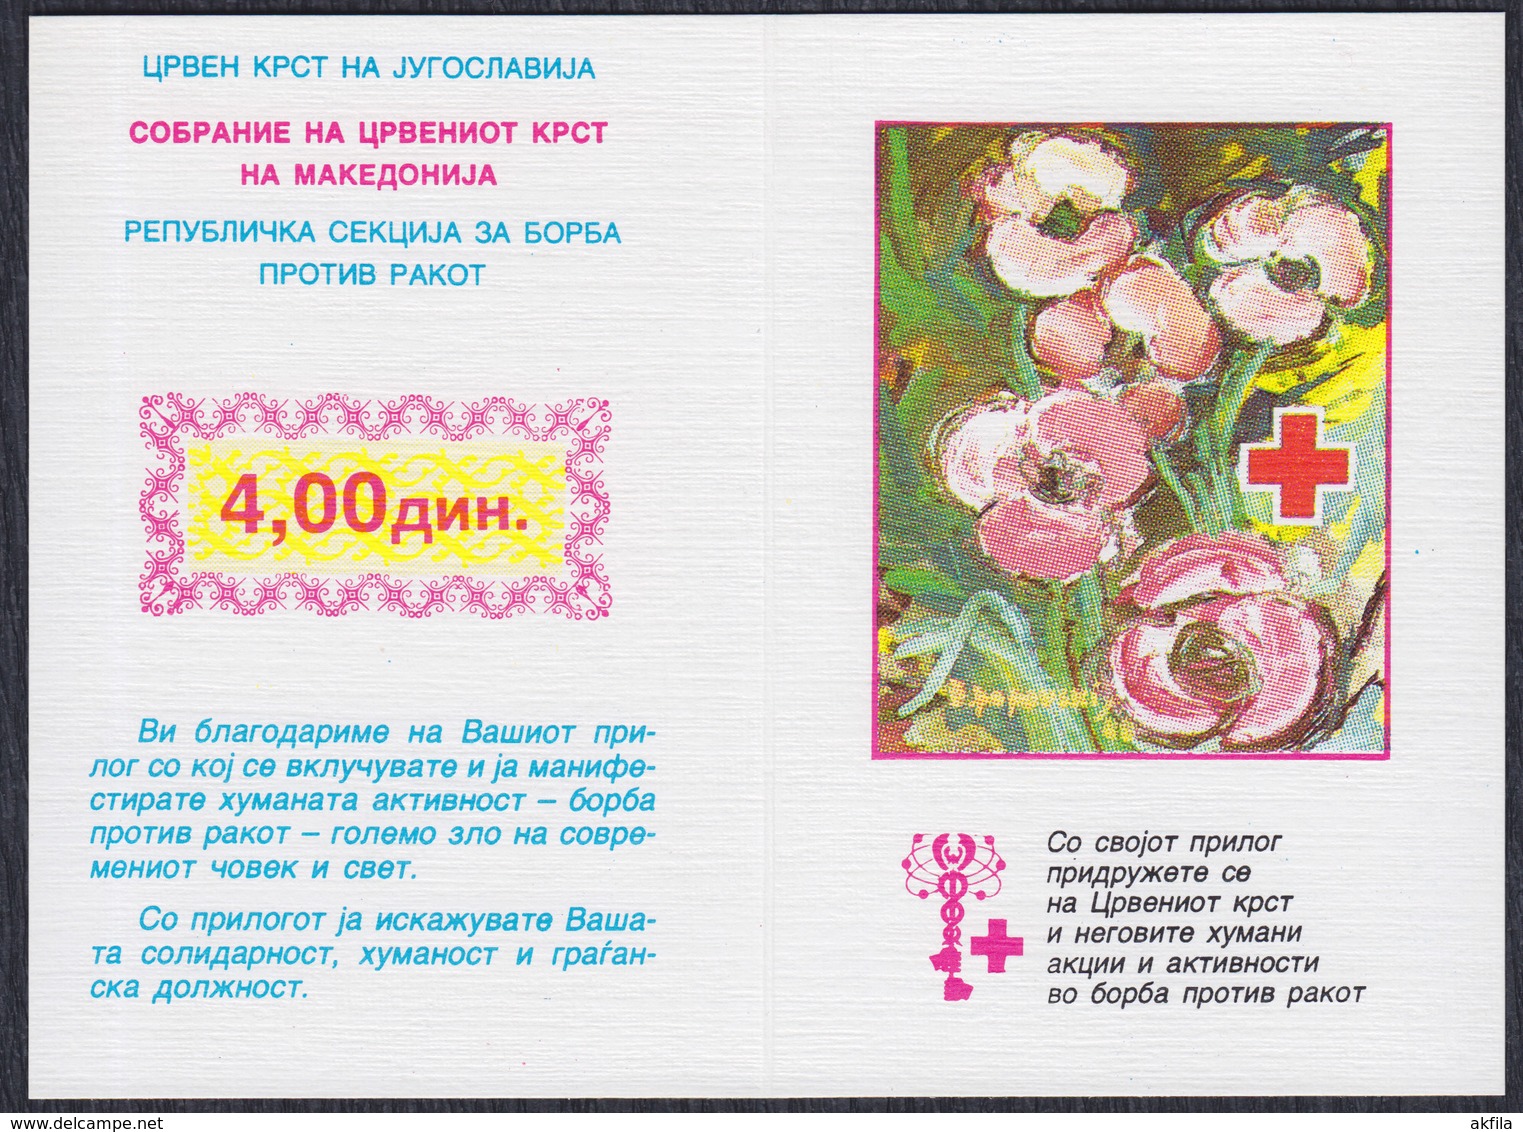 Yugoslavia 1990 Fight Against Cancer, Surcharge, Booklet Perforated And Imperforated - Booklets